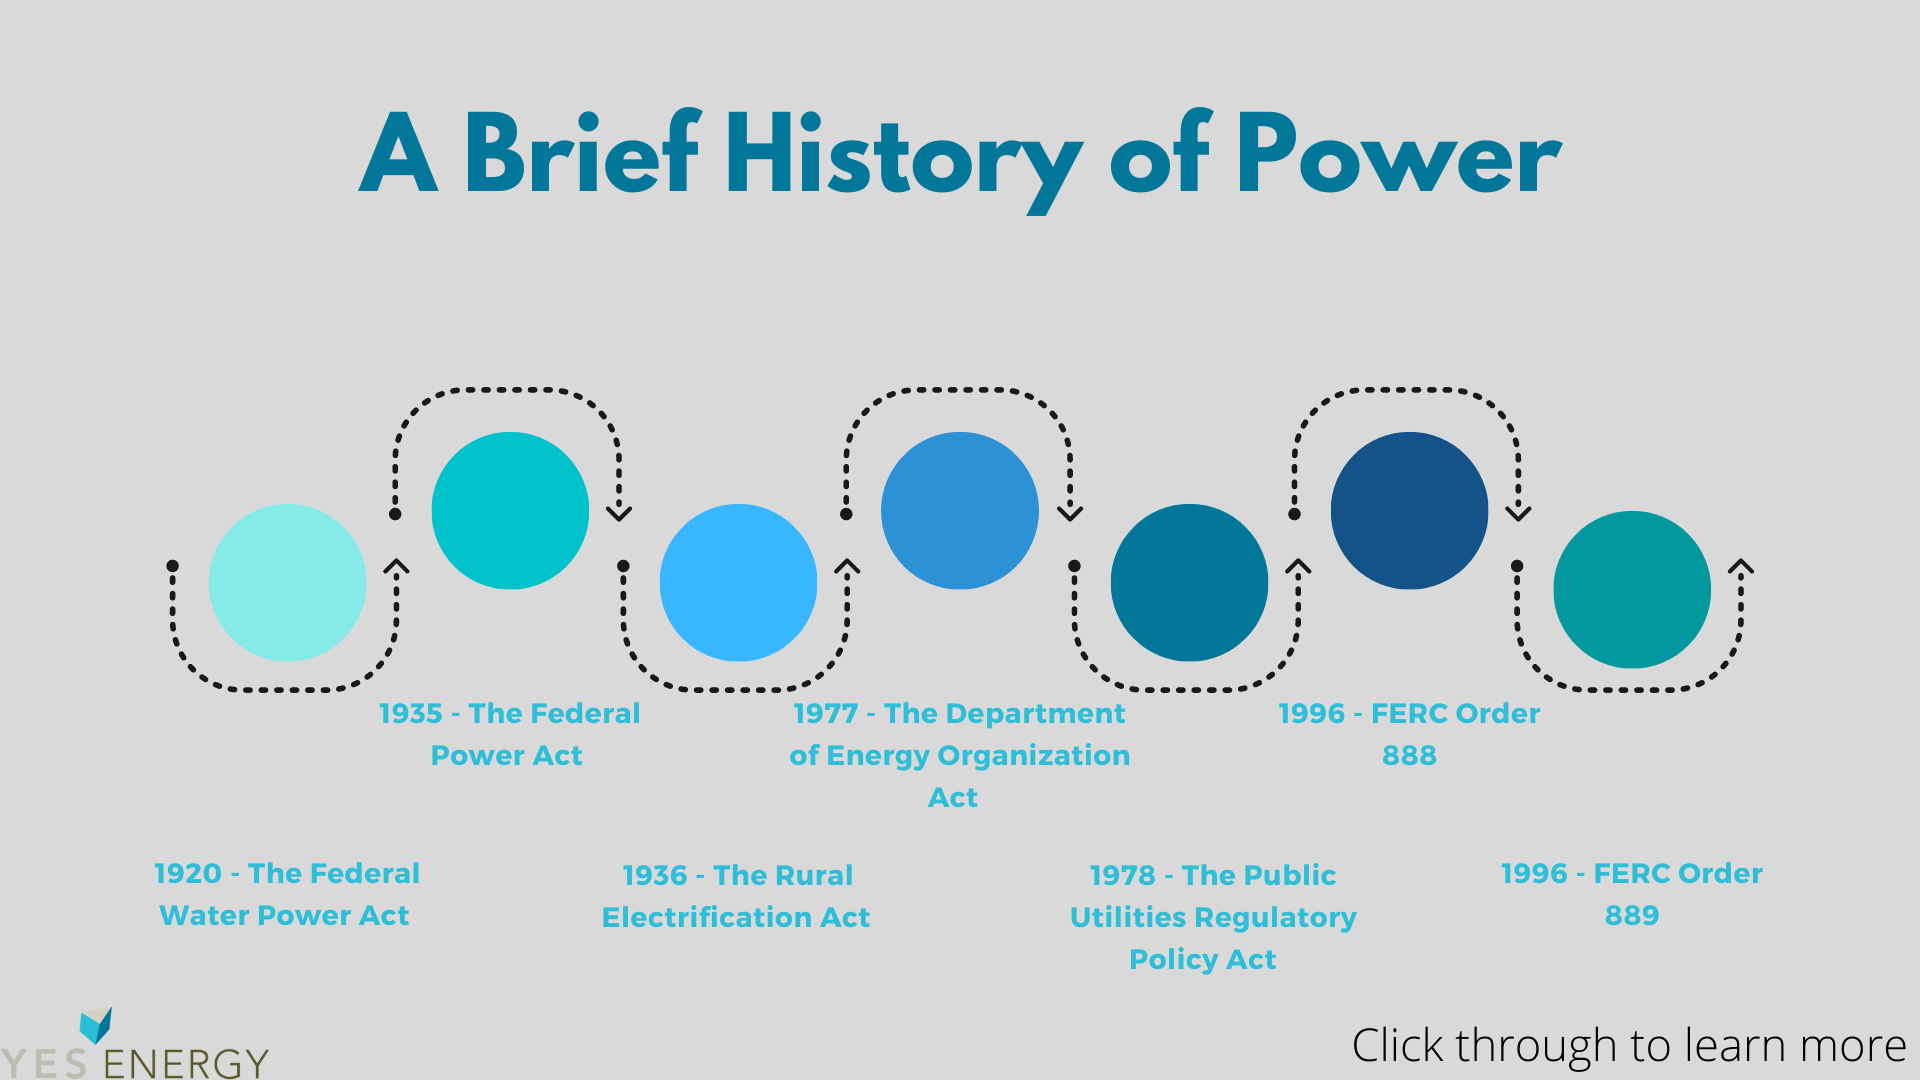 Brief History of Power Timeline